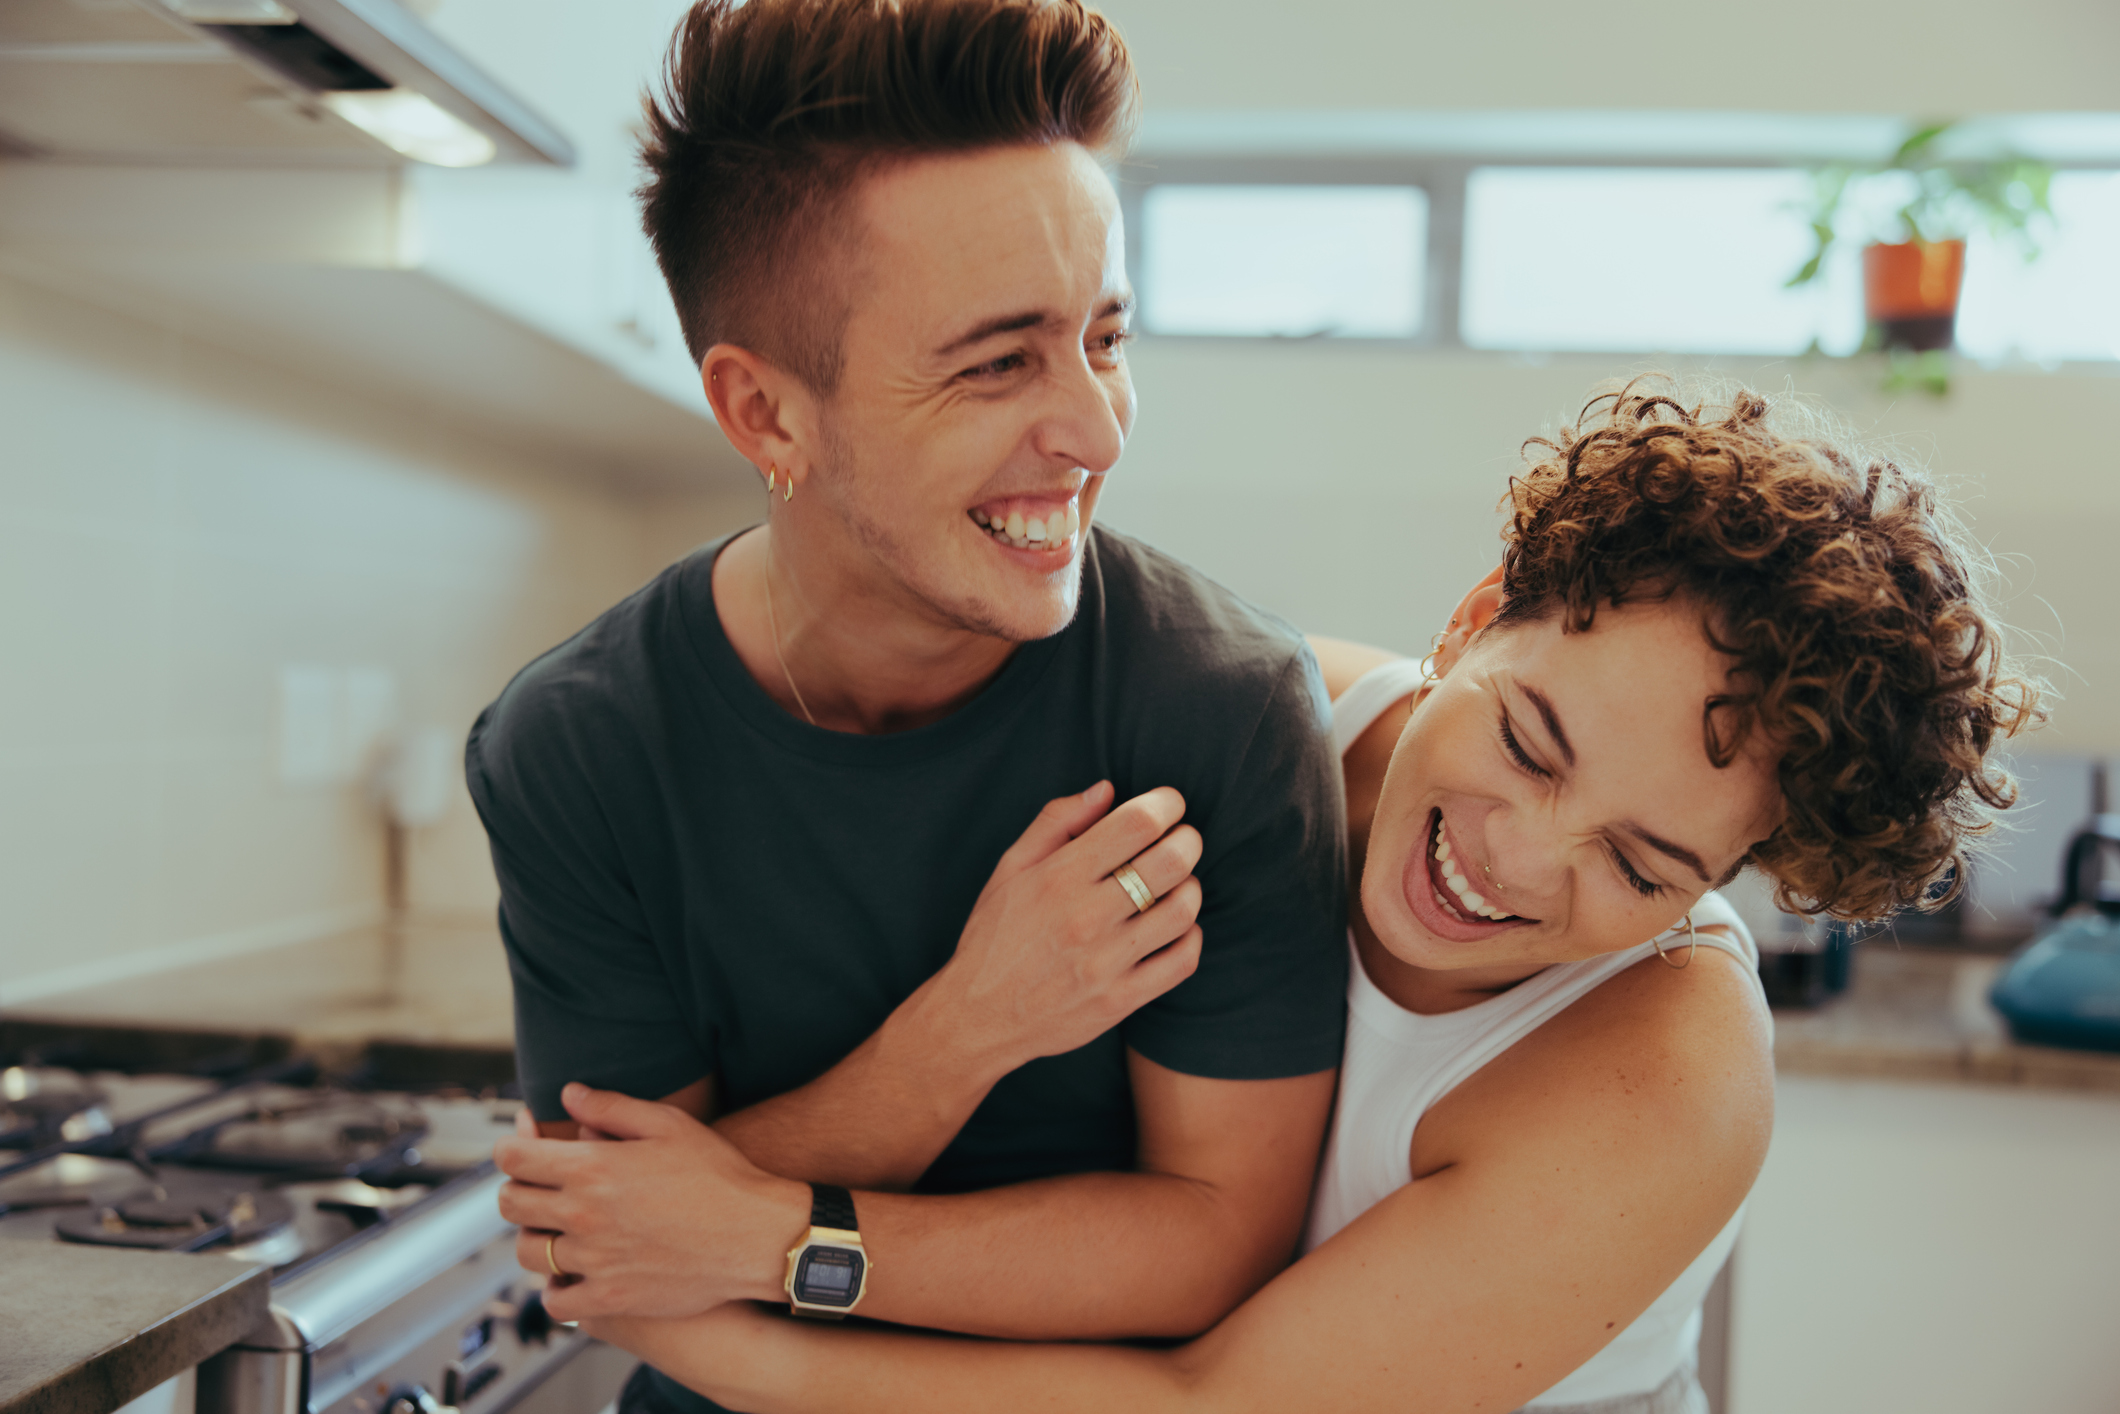 Young queer couple laughing together indoors. Happy young queer couple having fun together while standing in their kitchen. Romantic young LGBTQ+ couple bonding fondly at home.